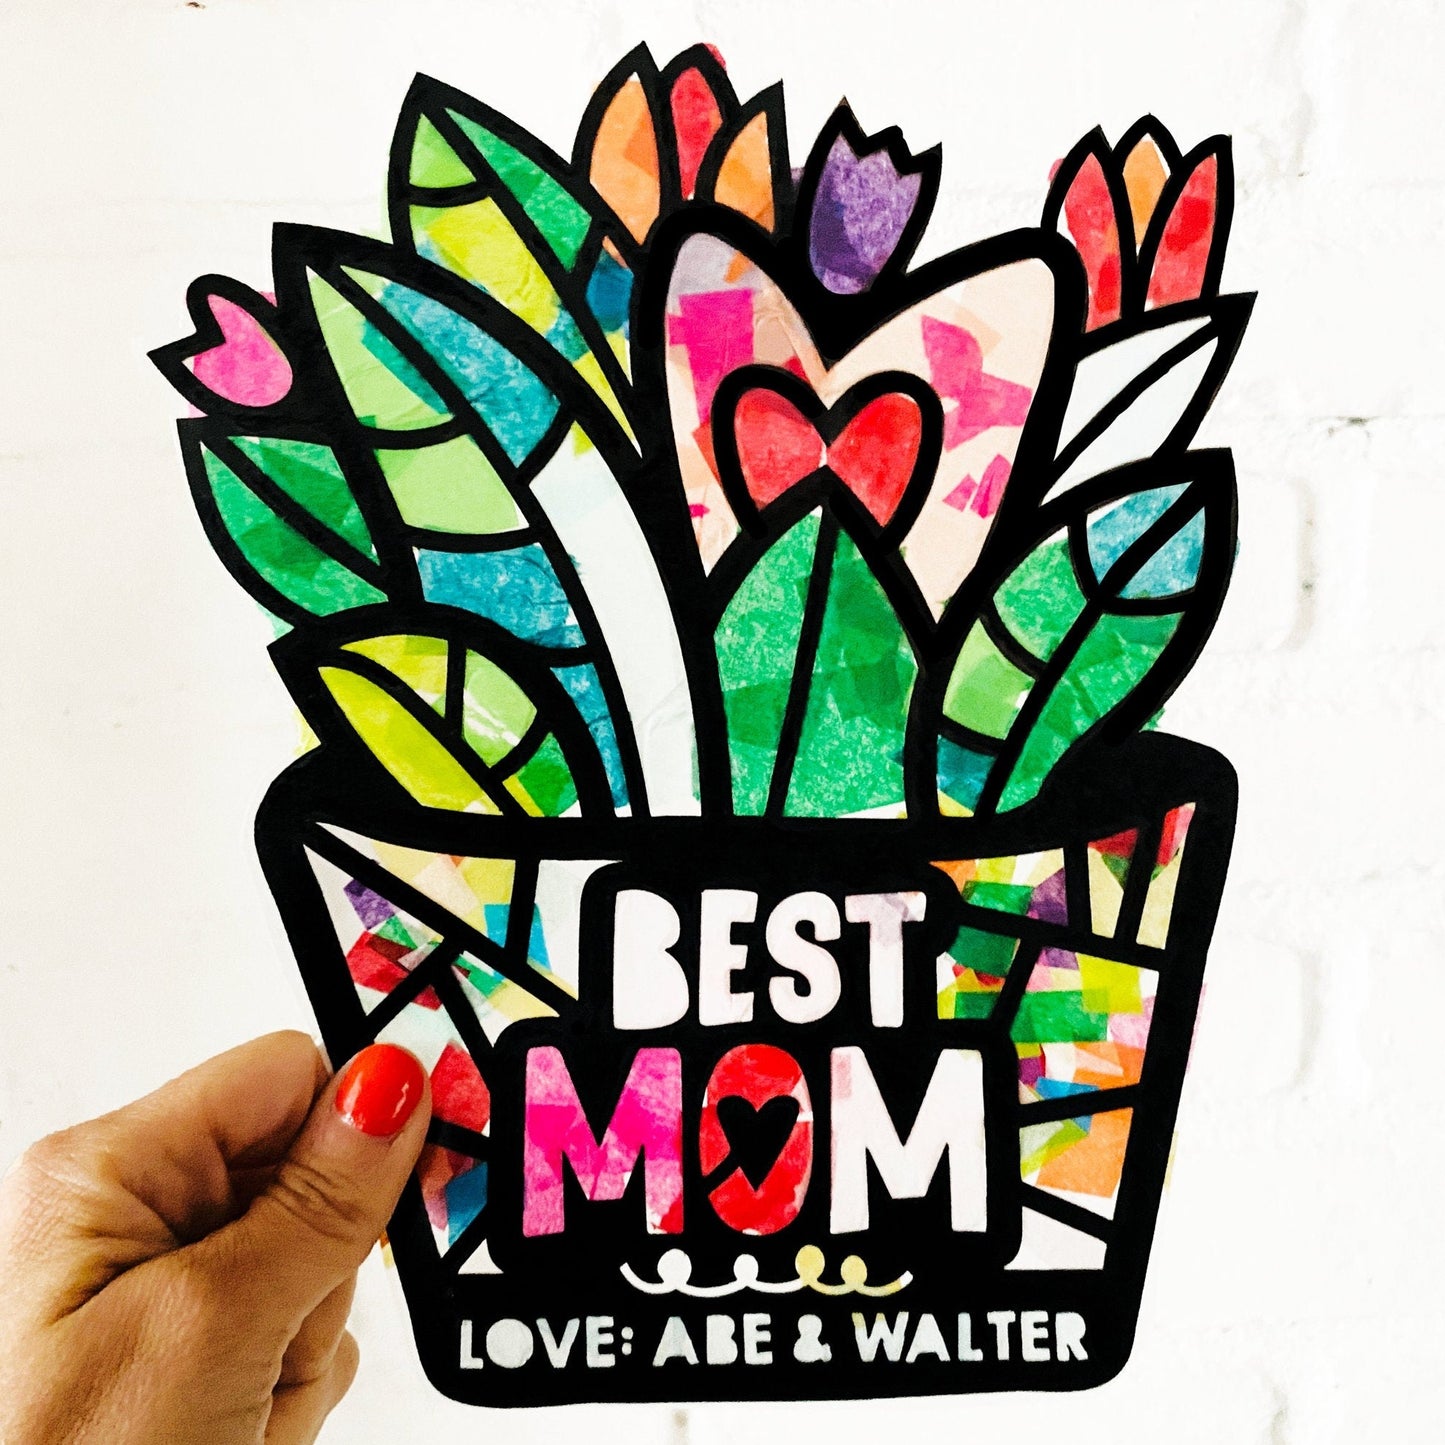 Best mom art gift for plant mom. Craft kit for Mother's Day.